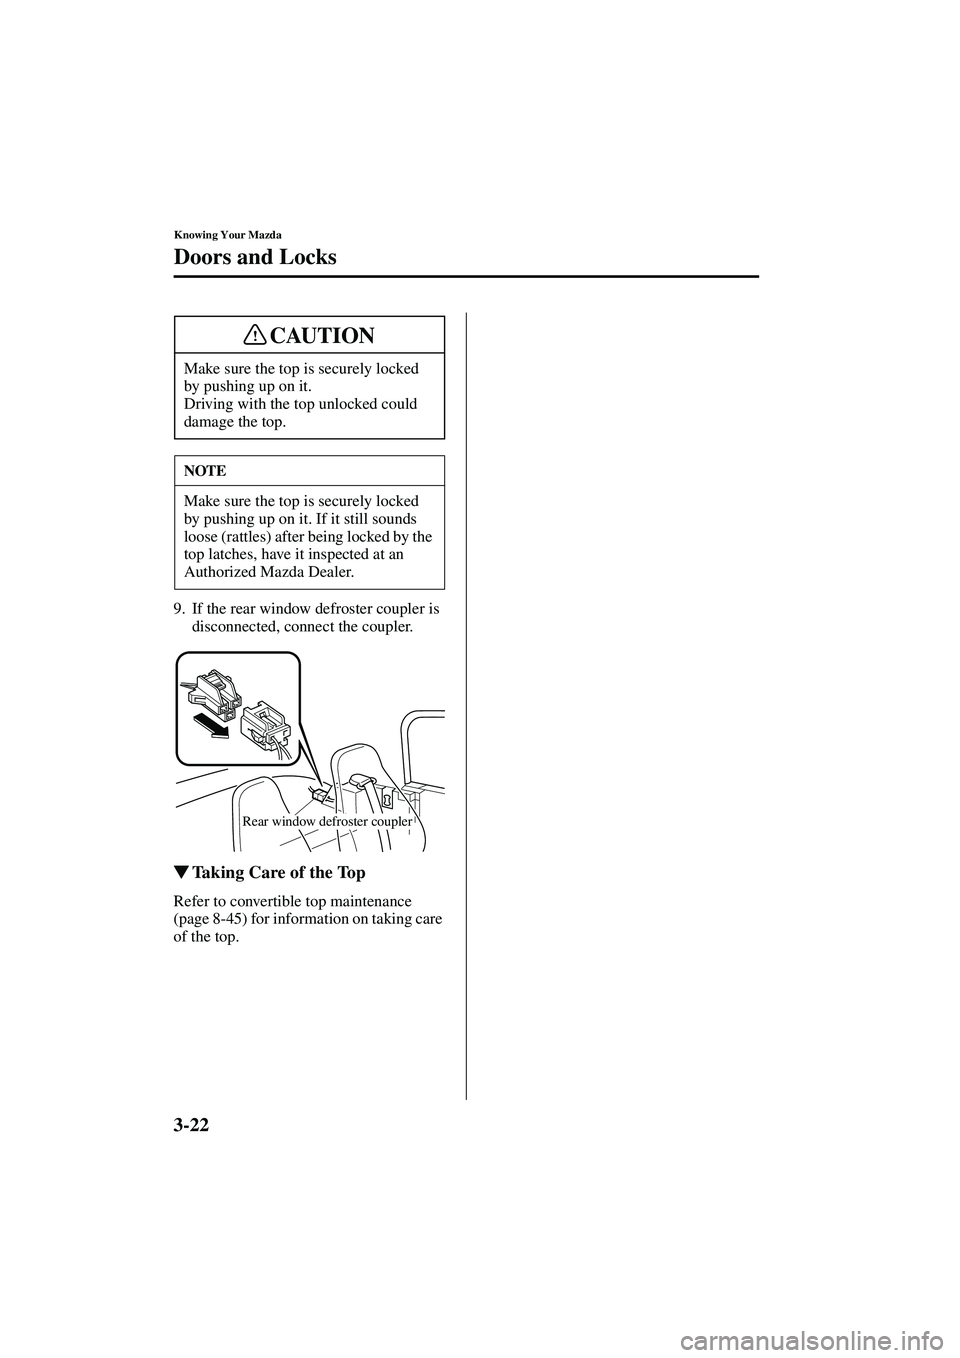 MAZDA MODEL MX-5 MIATA 2004 Workshop Manual 3-22
Knowing Your Mazda
Doors and Locks
Form No. 8S15-EA-03G
9. If the rear window defroster coupler is disconnected, connect the coupler.
Taking Care of the Top
Refer to convertible top maintenance 